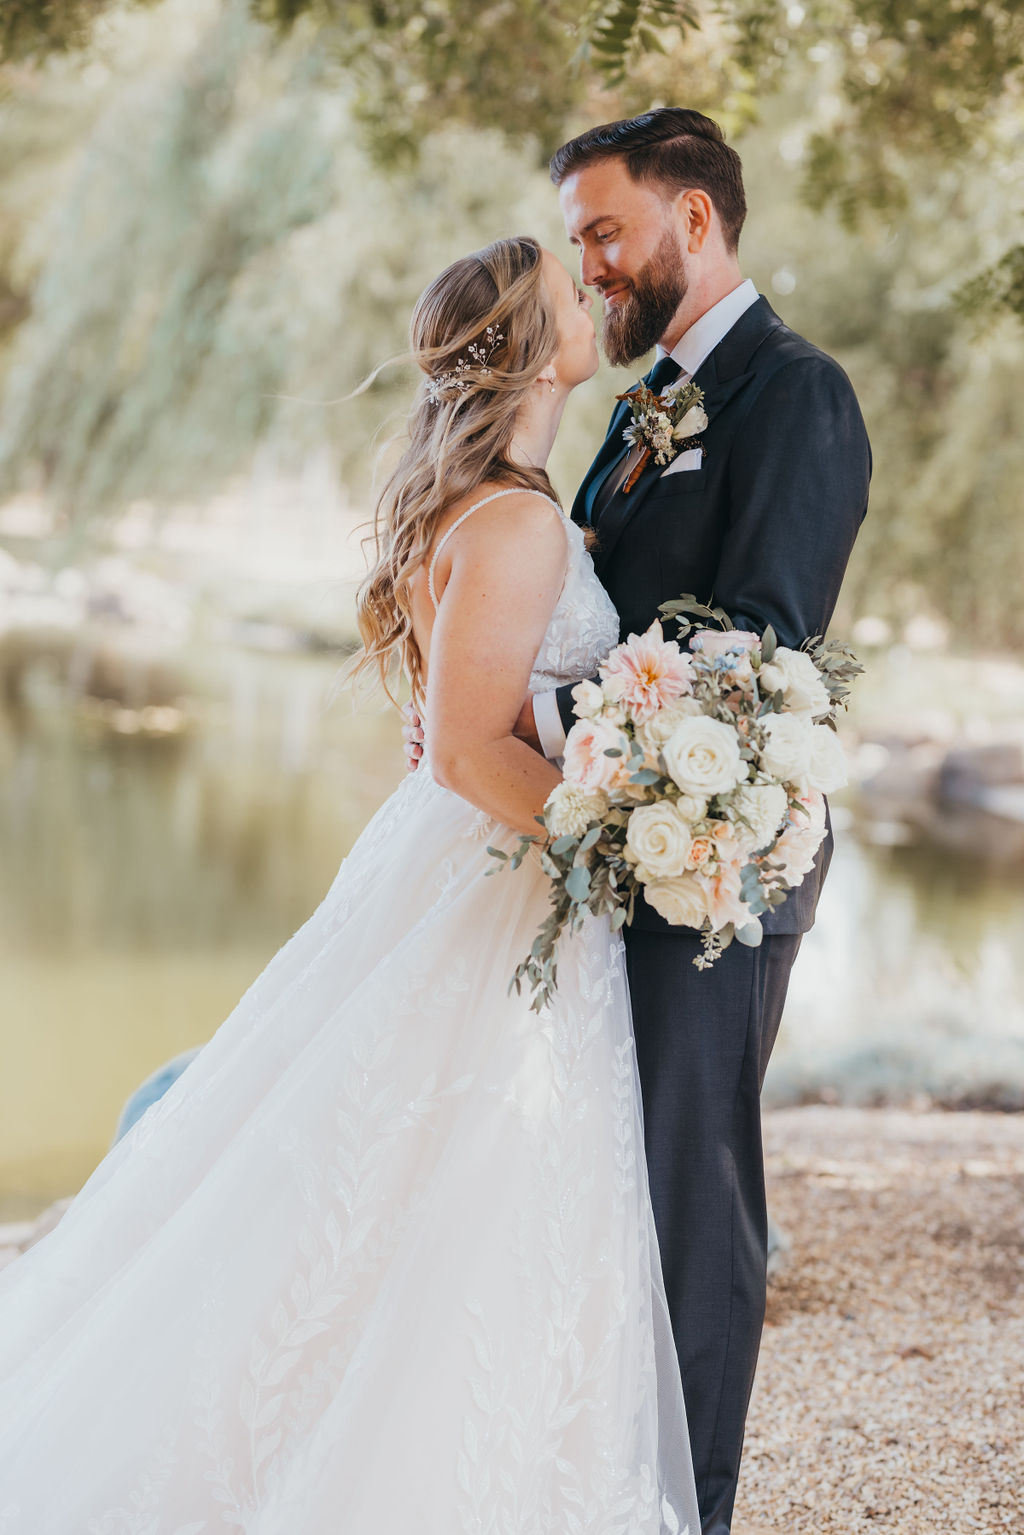 A bride and groom kissing beside a lake, surrounded by trees. the bride is holding a large bouquet of flowers.